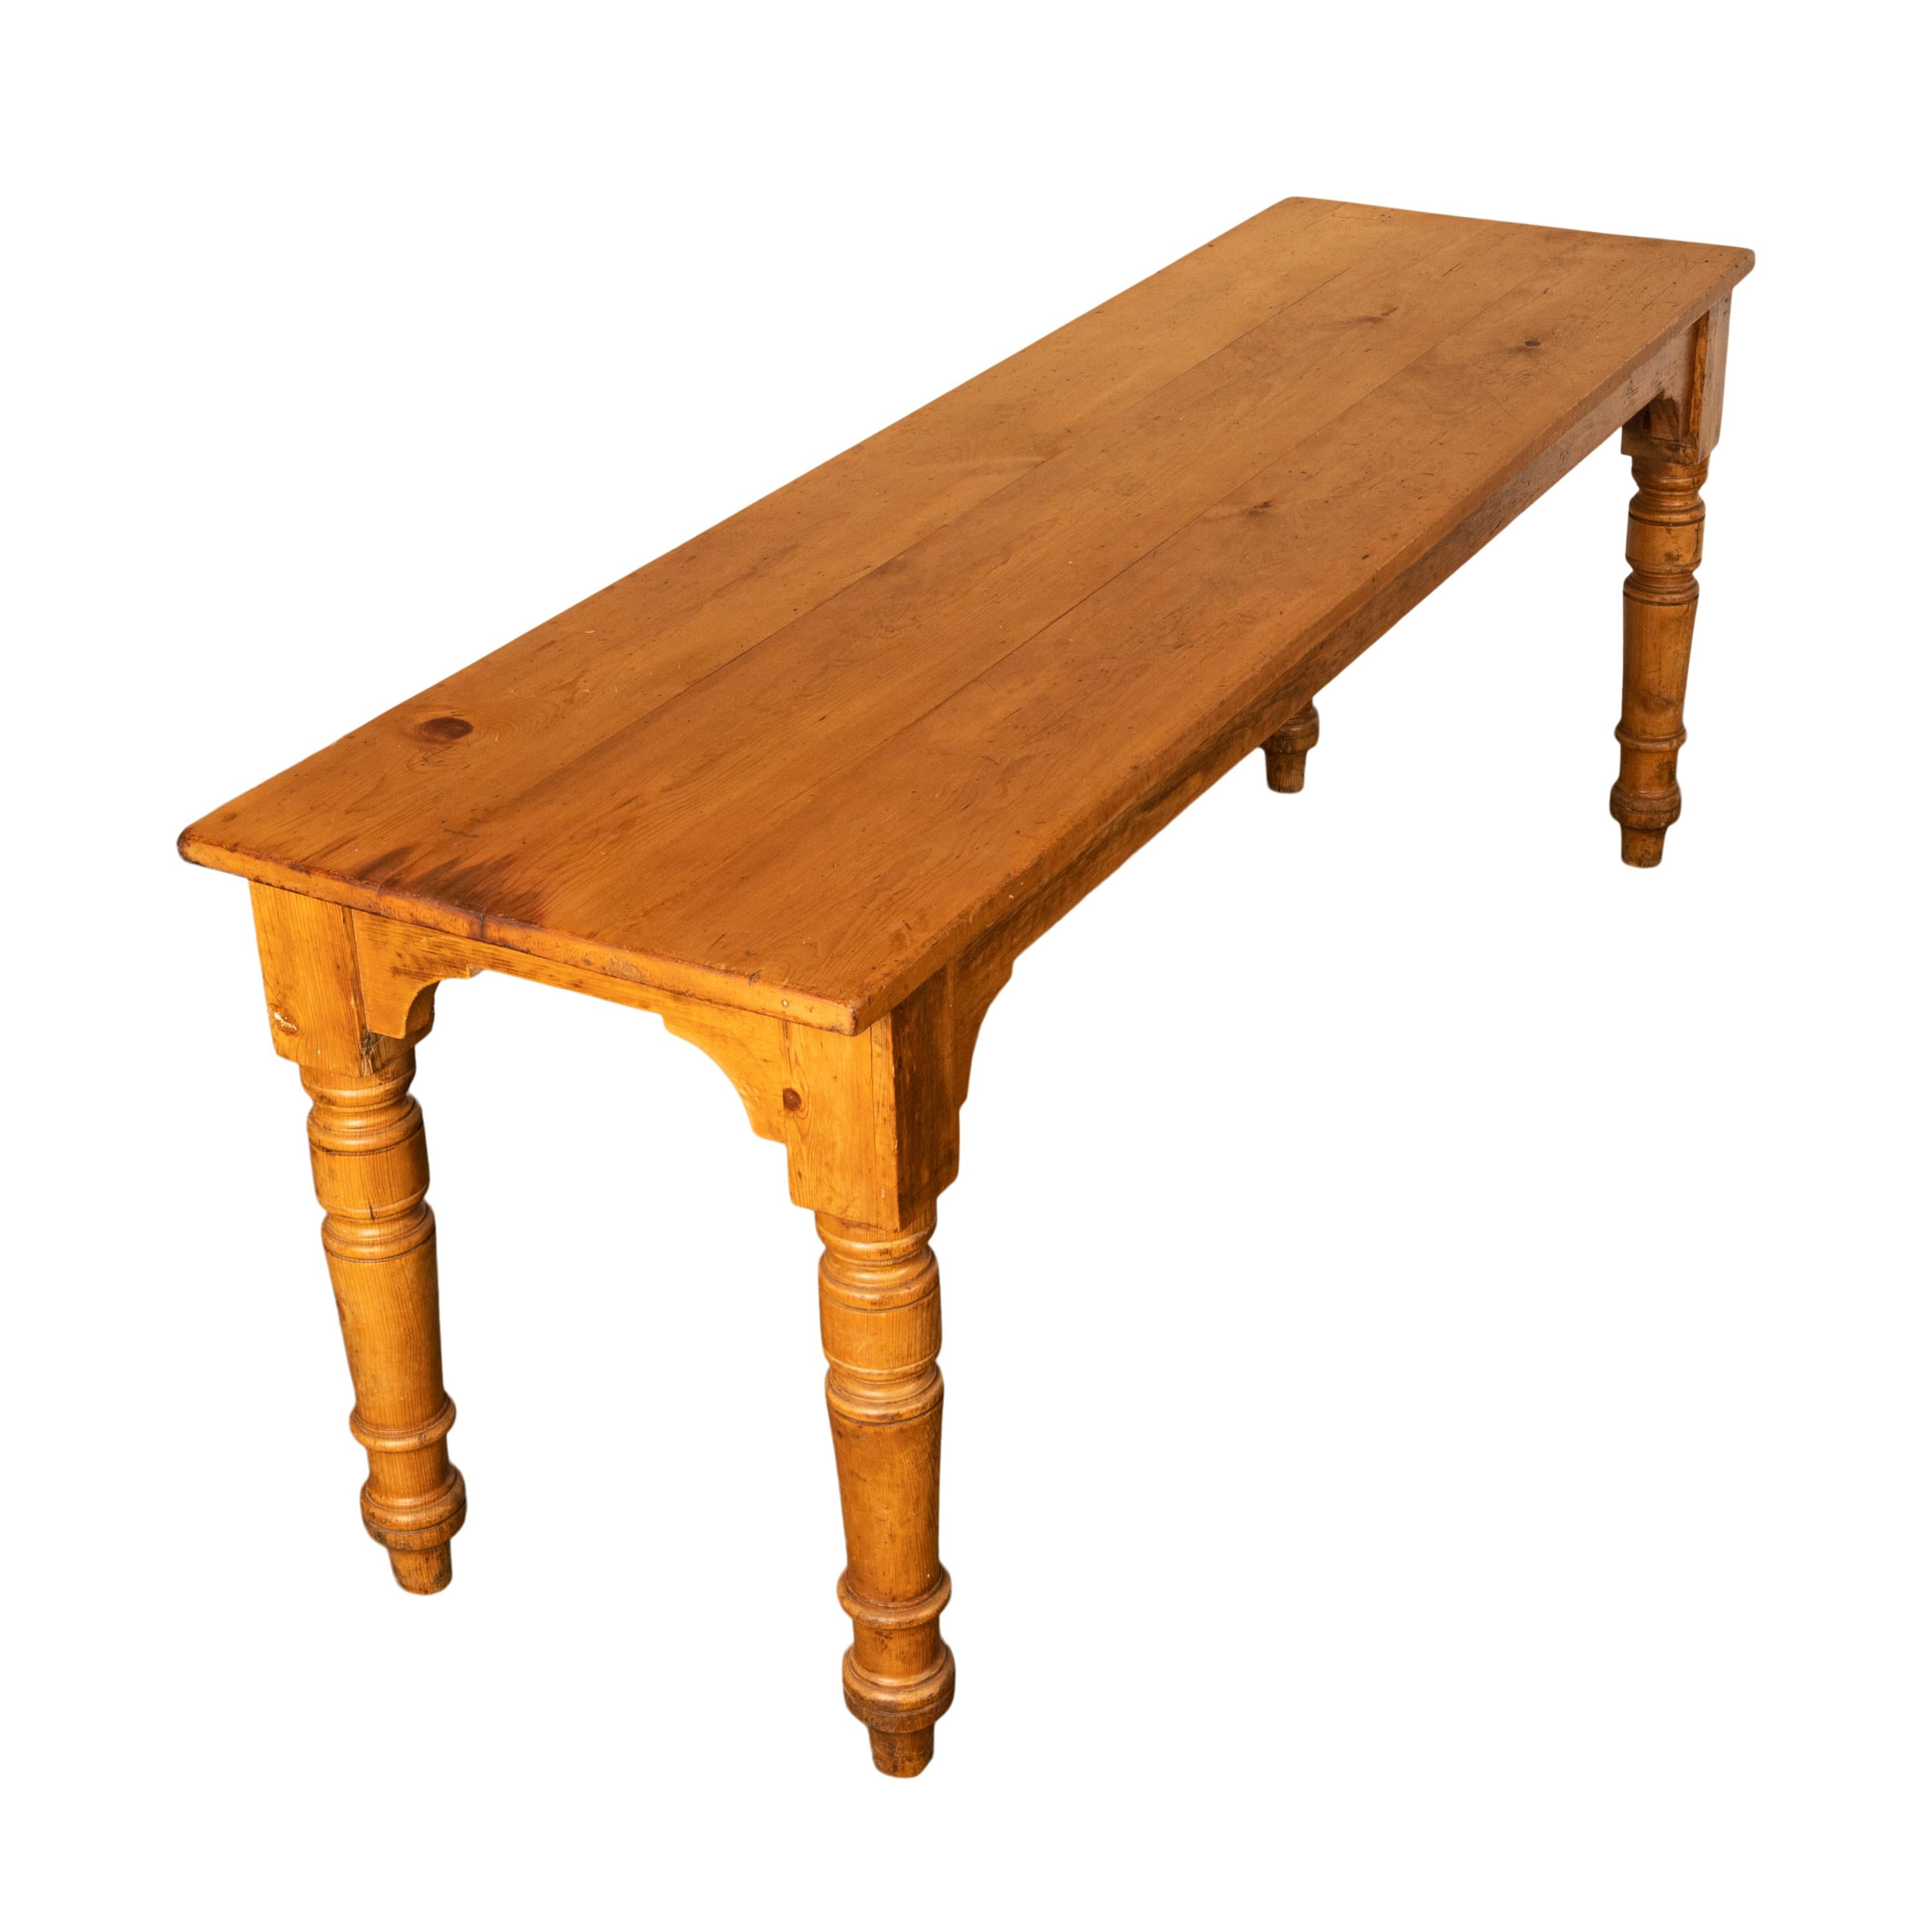 Antique 19th Century English Pine Country Farmhouse 8 seat Dining Table 1860 For Sale 6